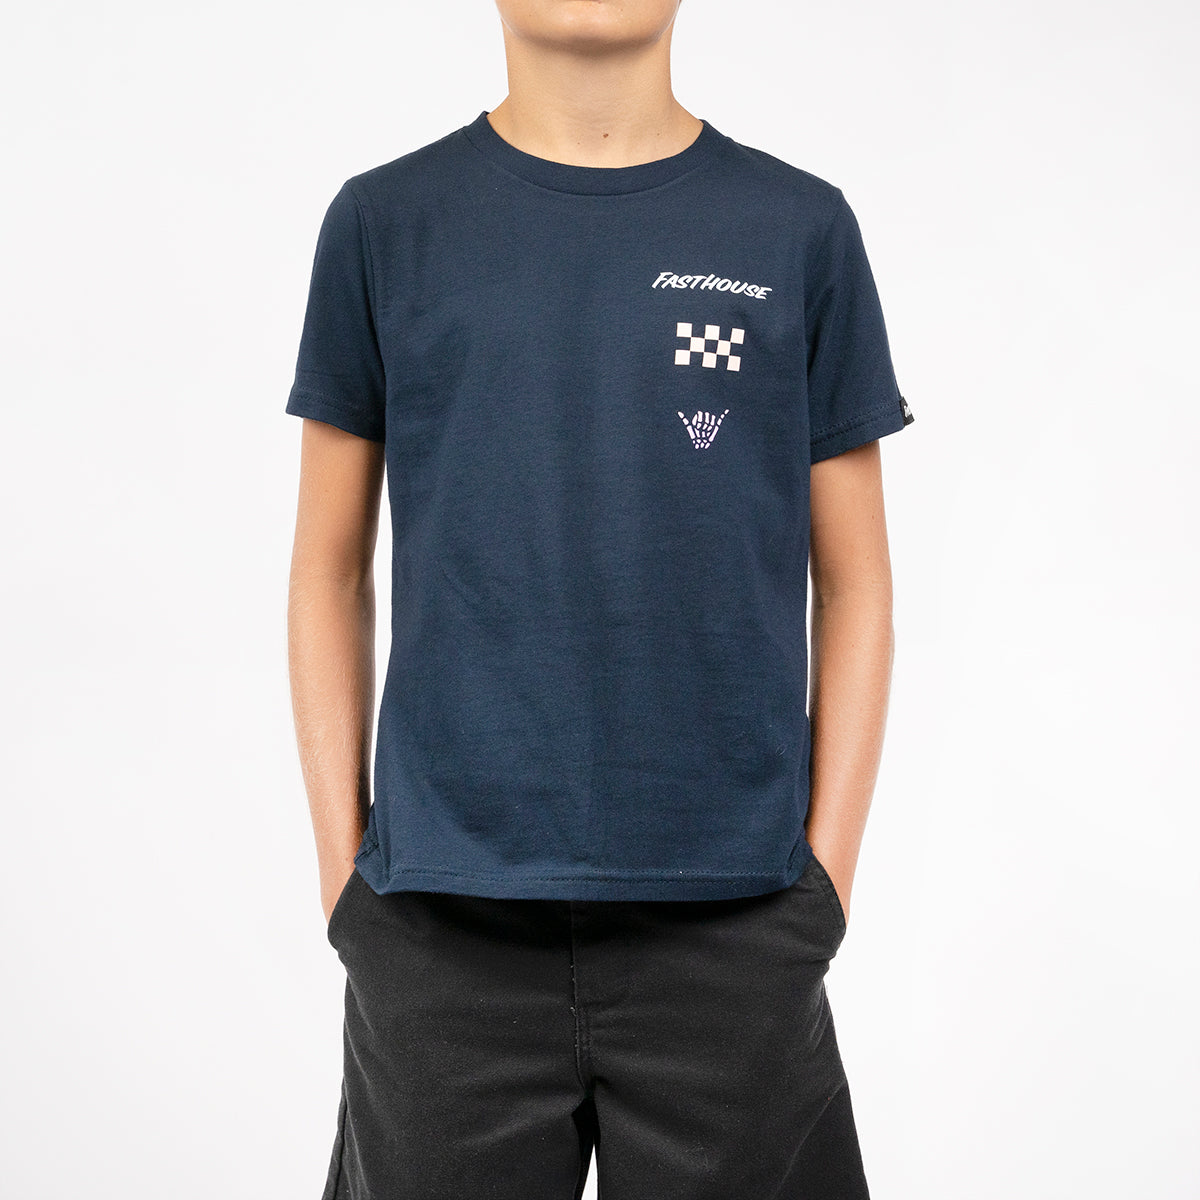 Subside Youth Tee - Navy